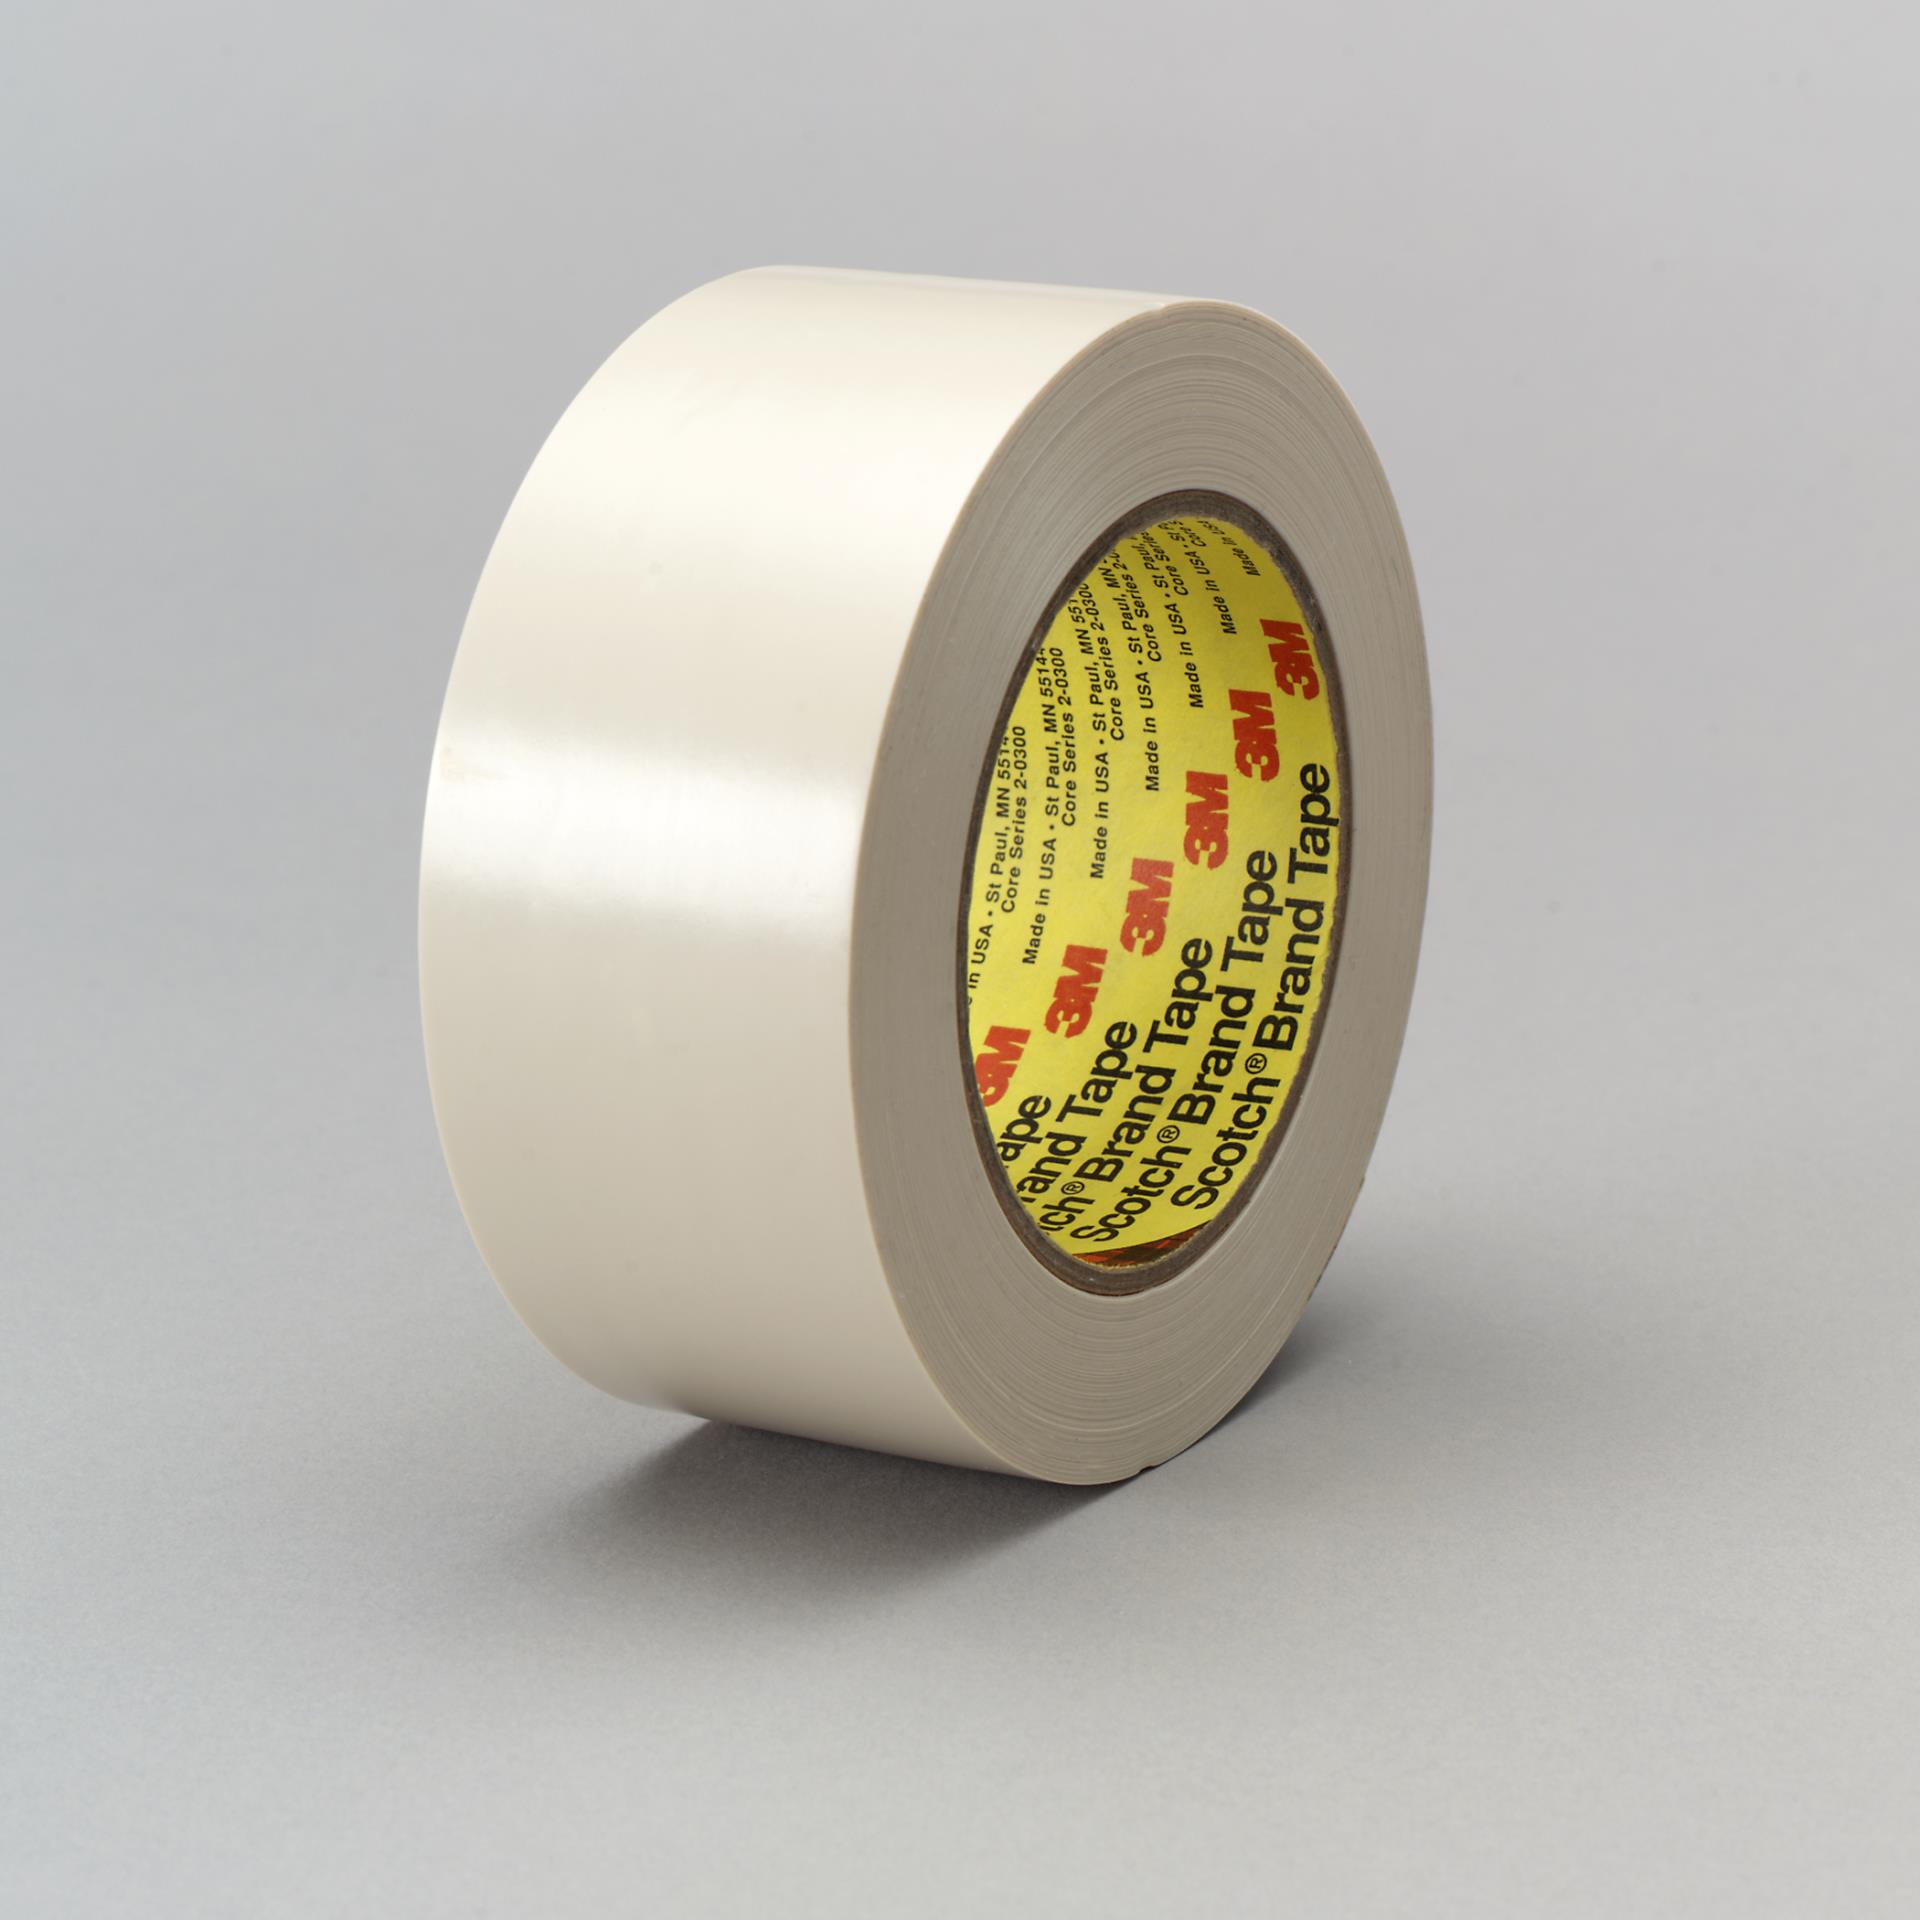 https://www.e-aircraftsupply.com/ItemImages/92/7010333692_3M_Electroplating_Tape_470_Tan.jpg